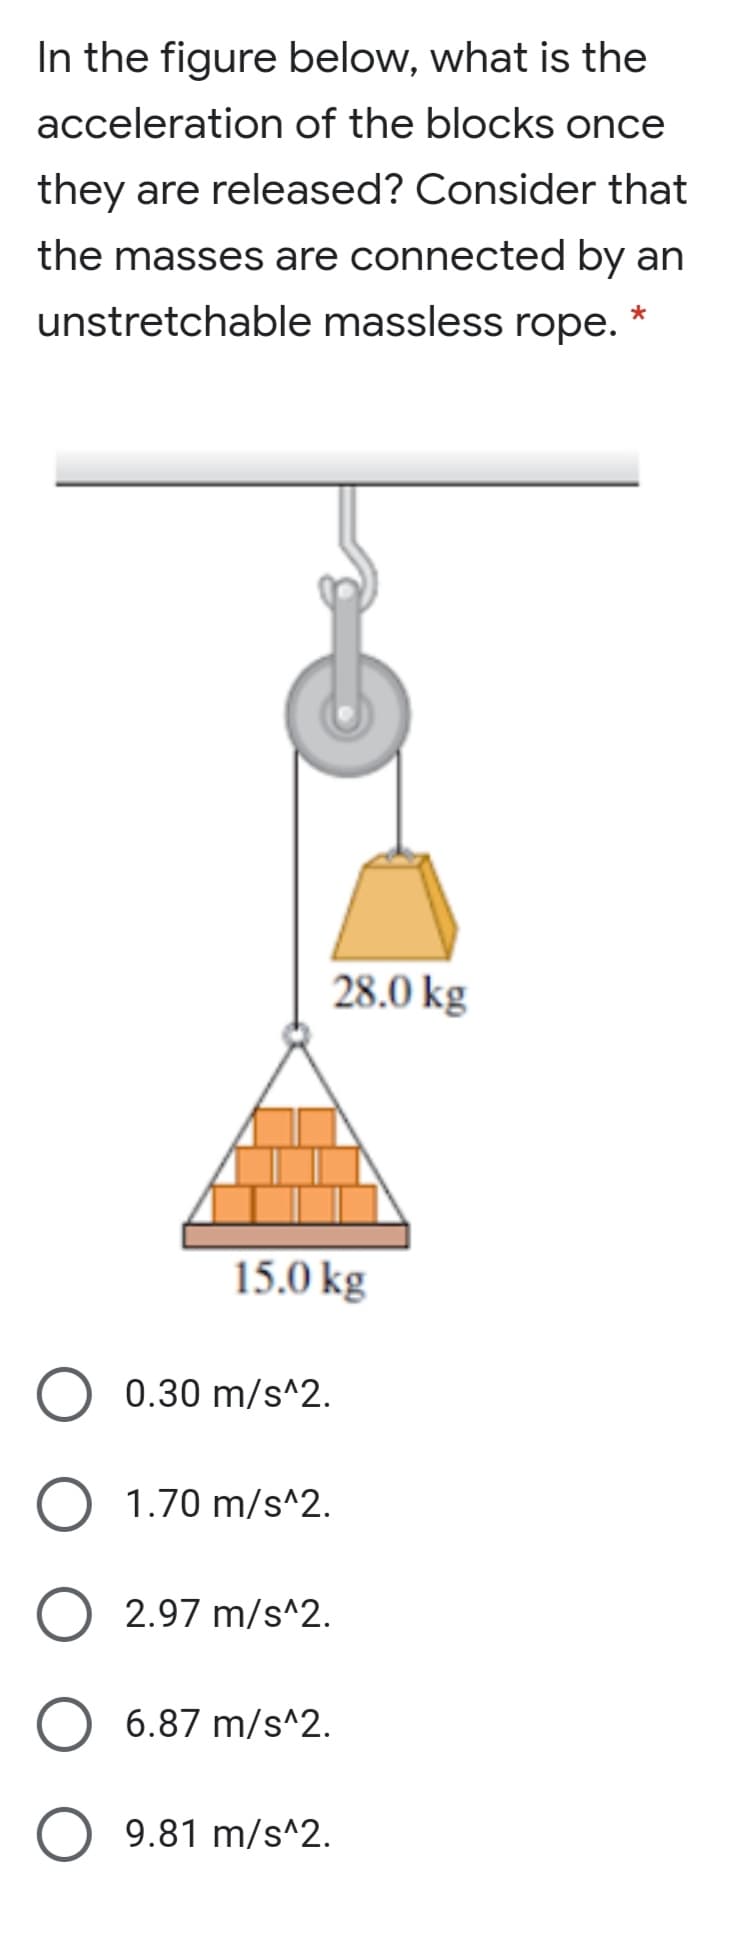 In the figure below, what is the
acceleration of the blocks once
they are released? Consider that
the masses are connected by an
unstretchable massless rope.
28.0 kg
15.0 kg
0.30 m/s^2.
O 1.70 m/s^2.
2.97 m/s^2.
6.87 m/s^2.
9.81 m/s^2.
